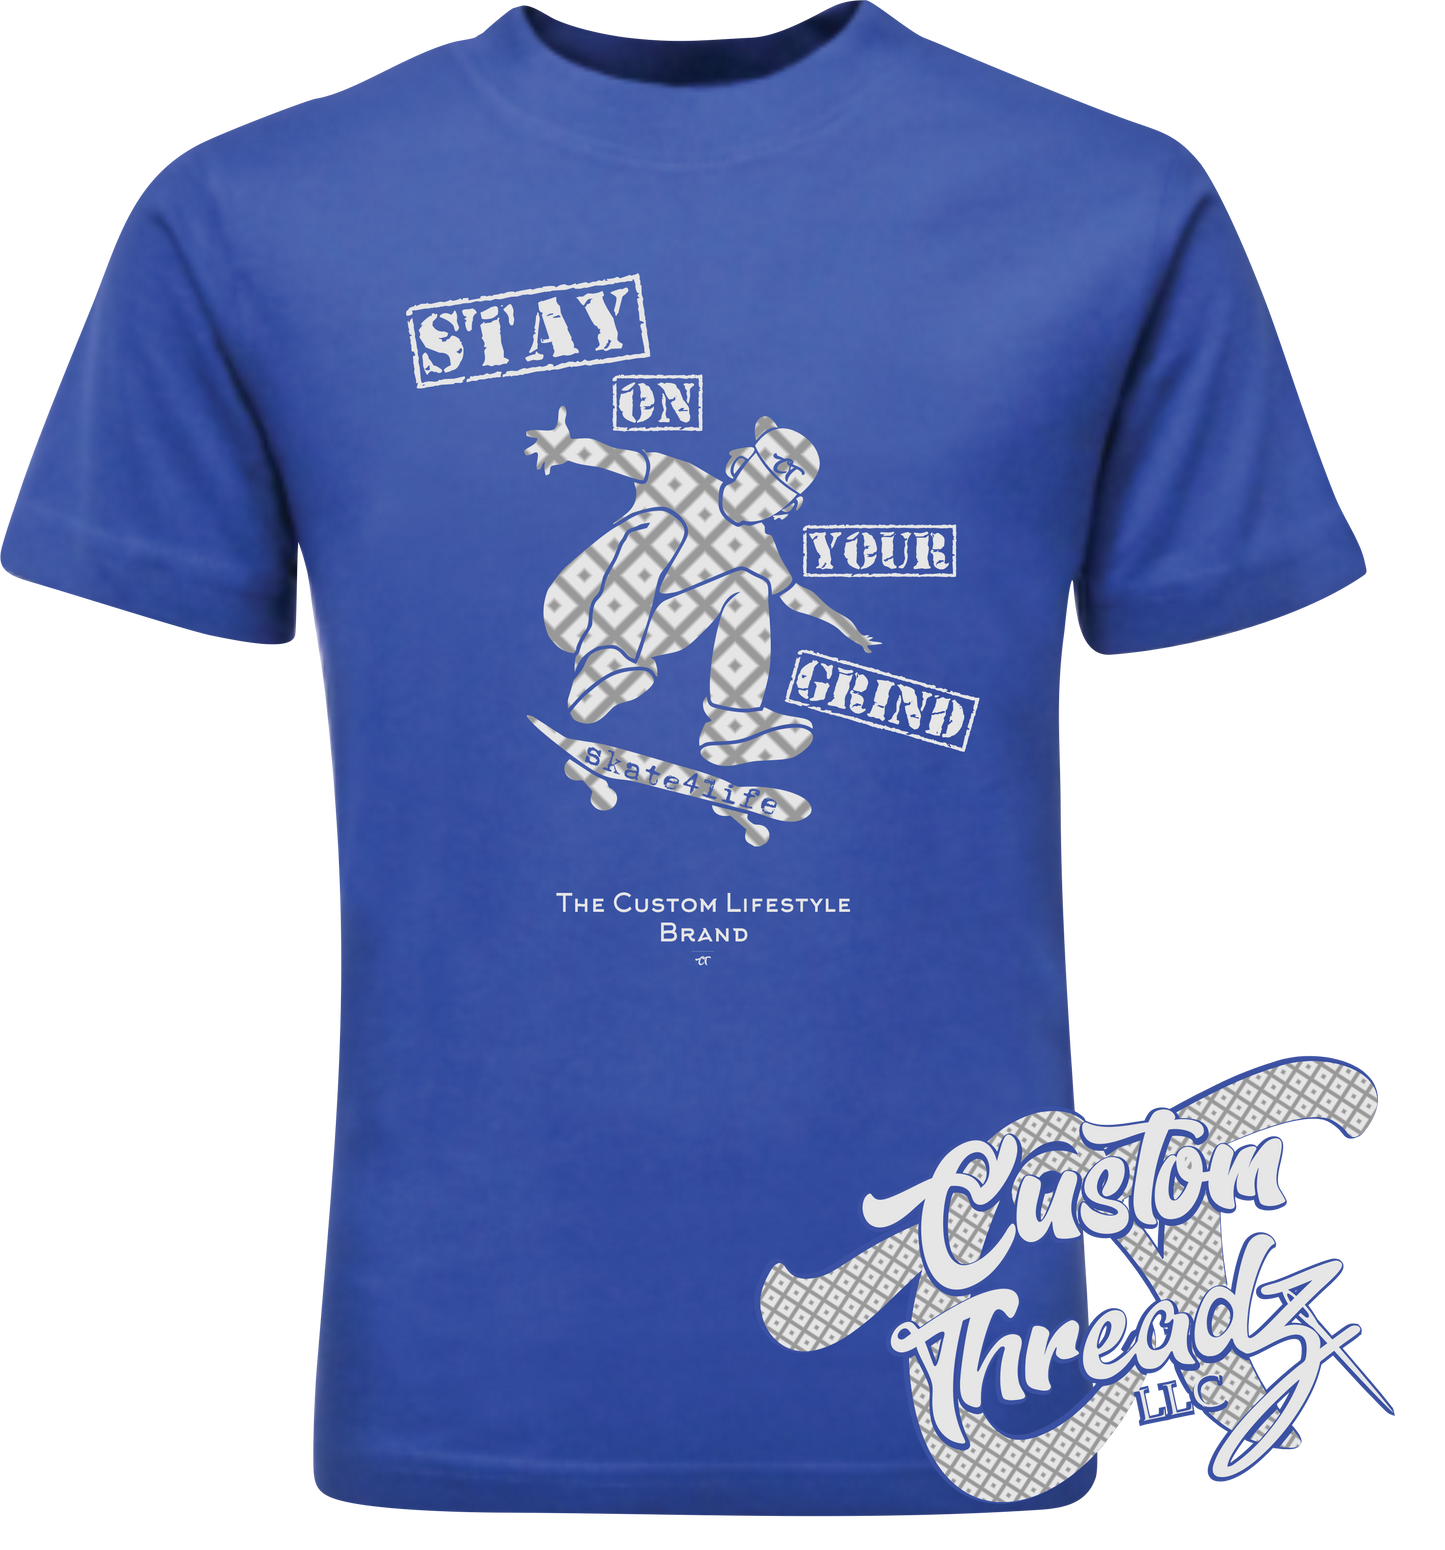 royal cotton t-shirt stay on your grind skate